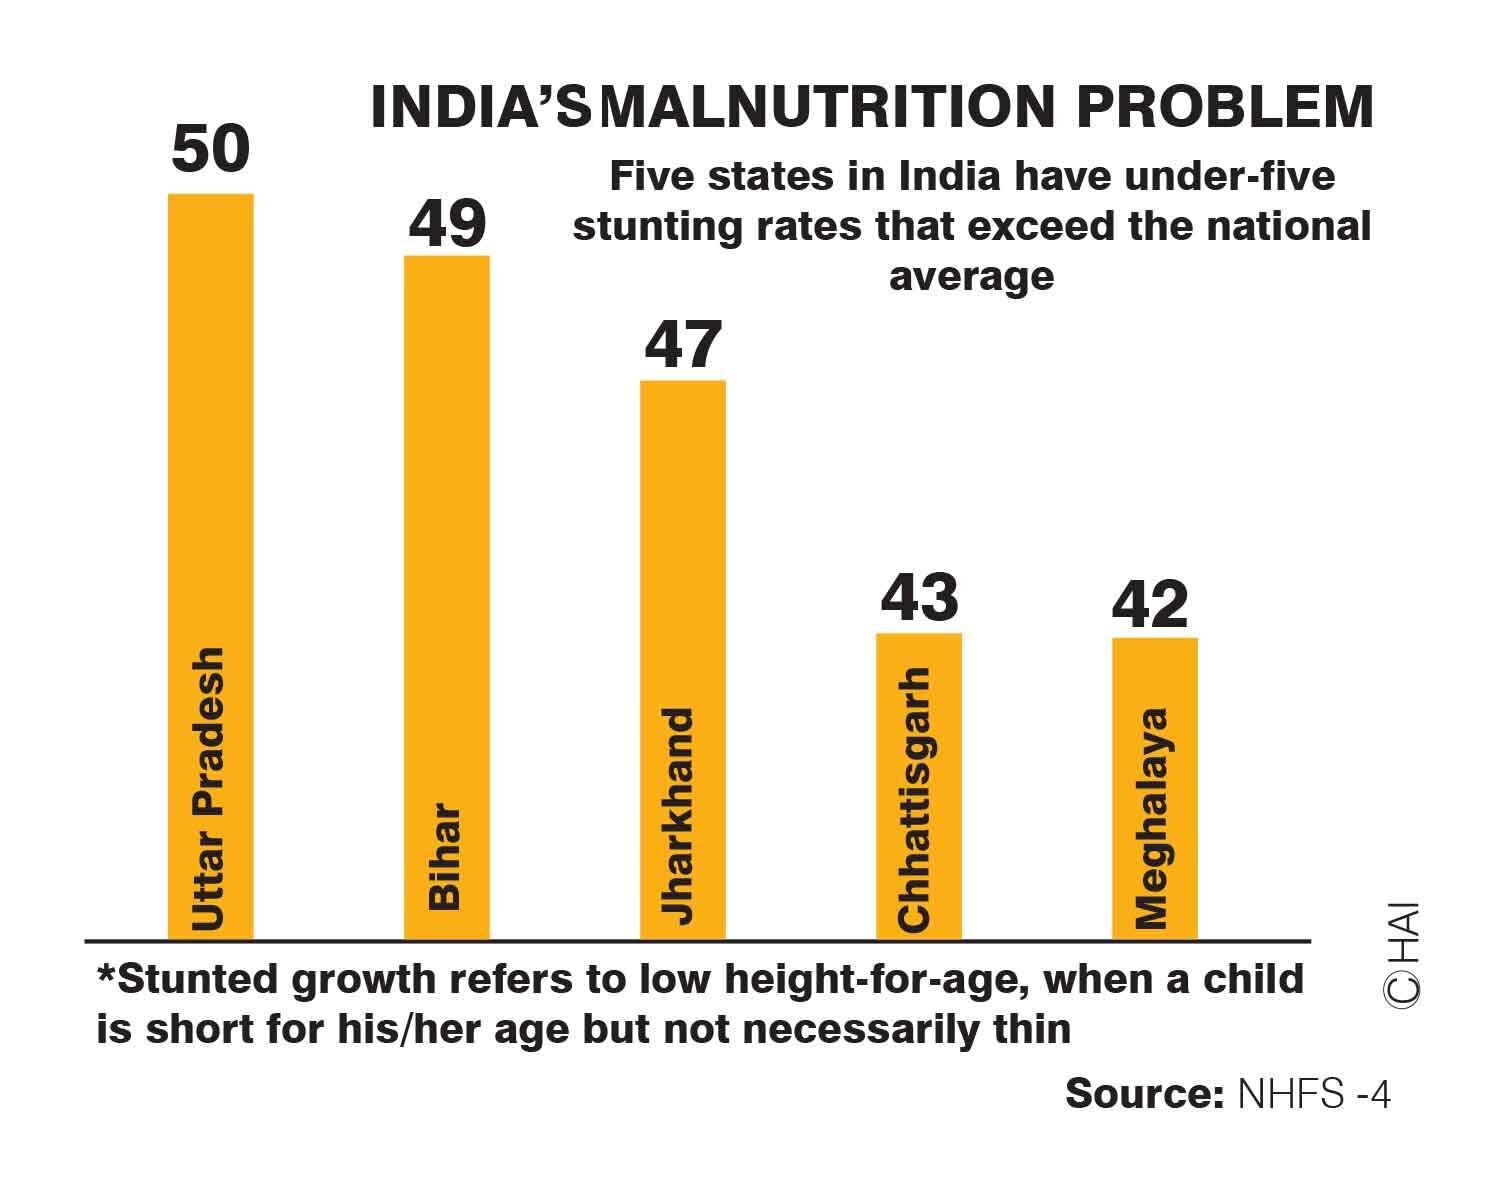 Why are Indian children stunted?